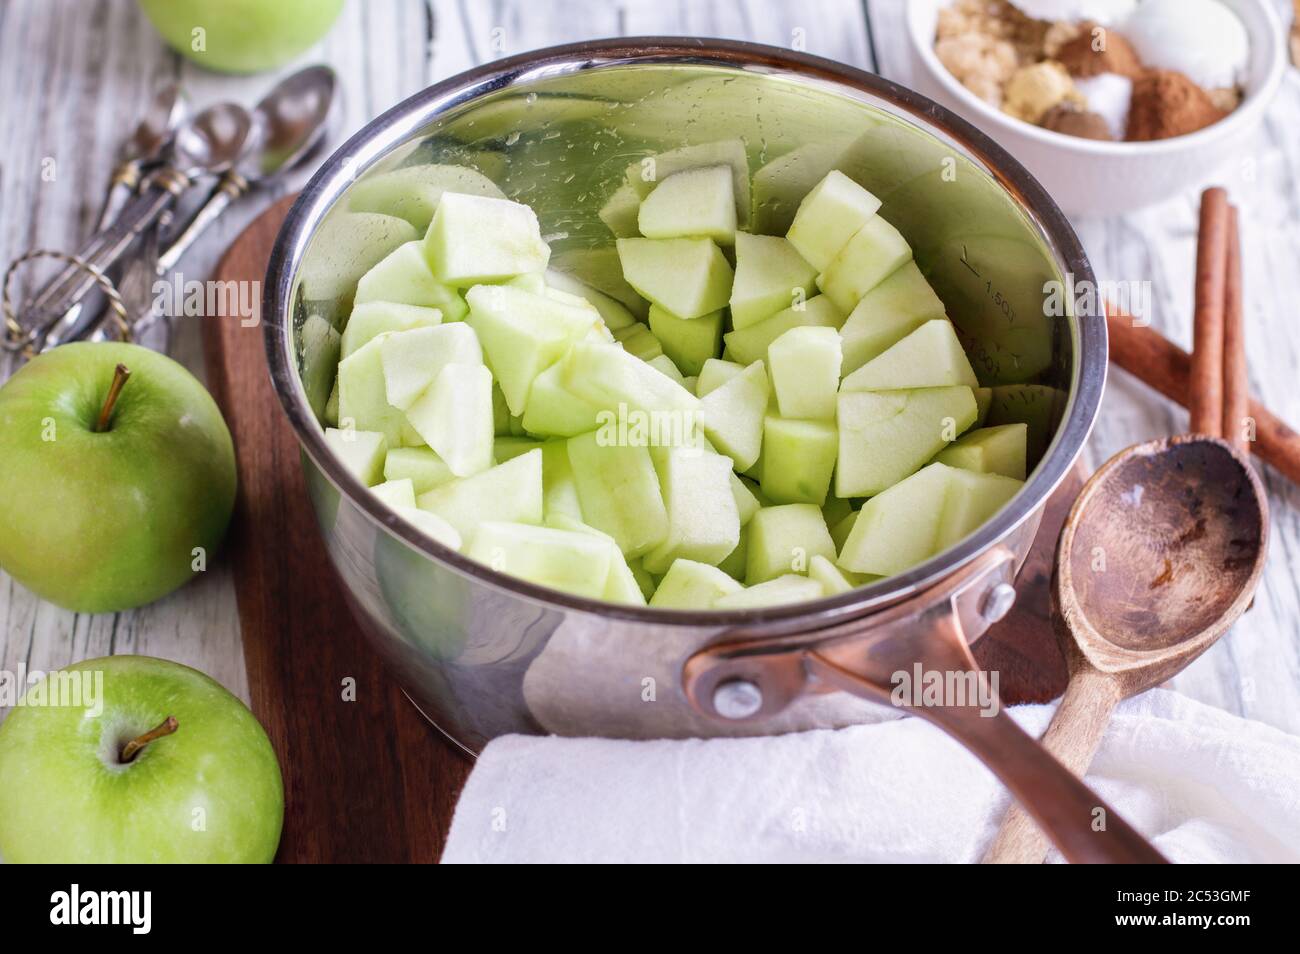 Ingredients of freshly diced Granny Smith green apples in a sauce pan with ingredients lying near by to make apple pies or tarts. Selective focus with Stock Photo